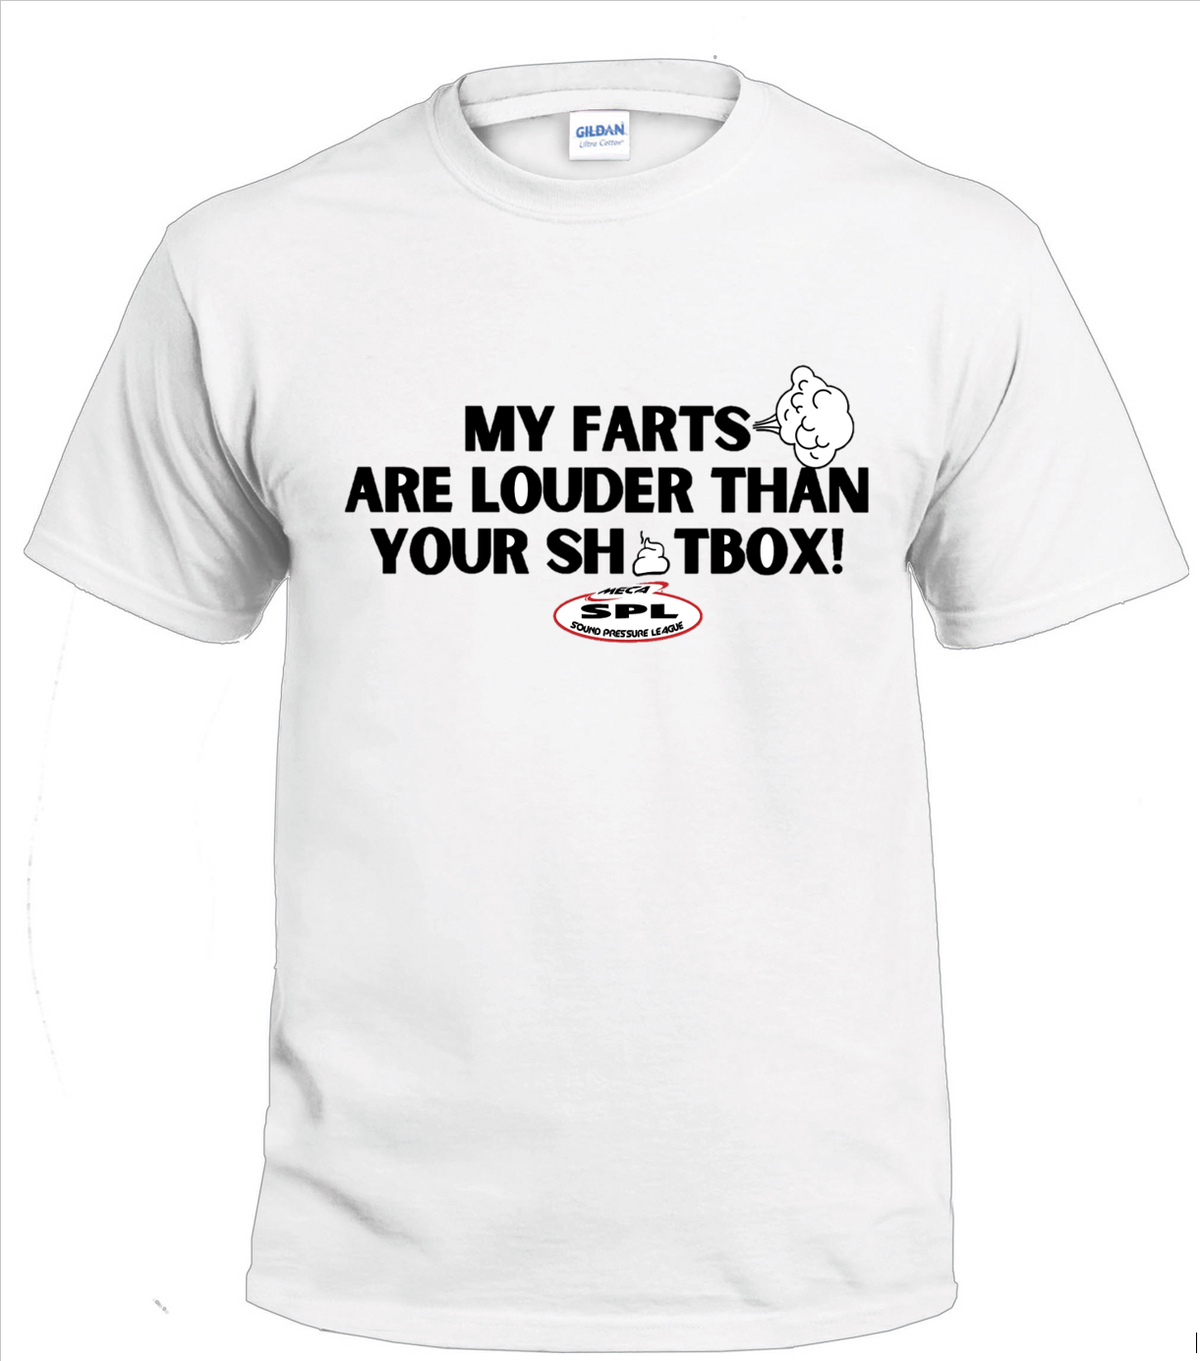 My Farts Are Louder Than Your Shitbox! t-shirt